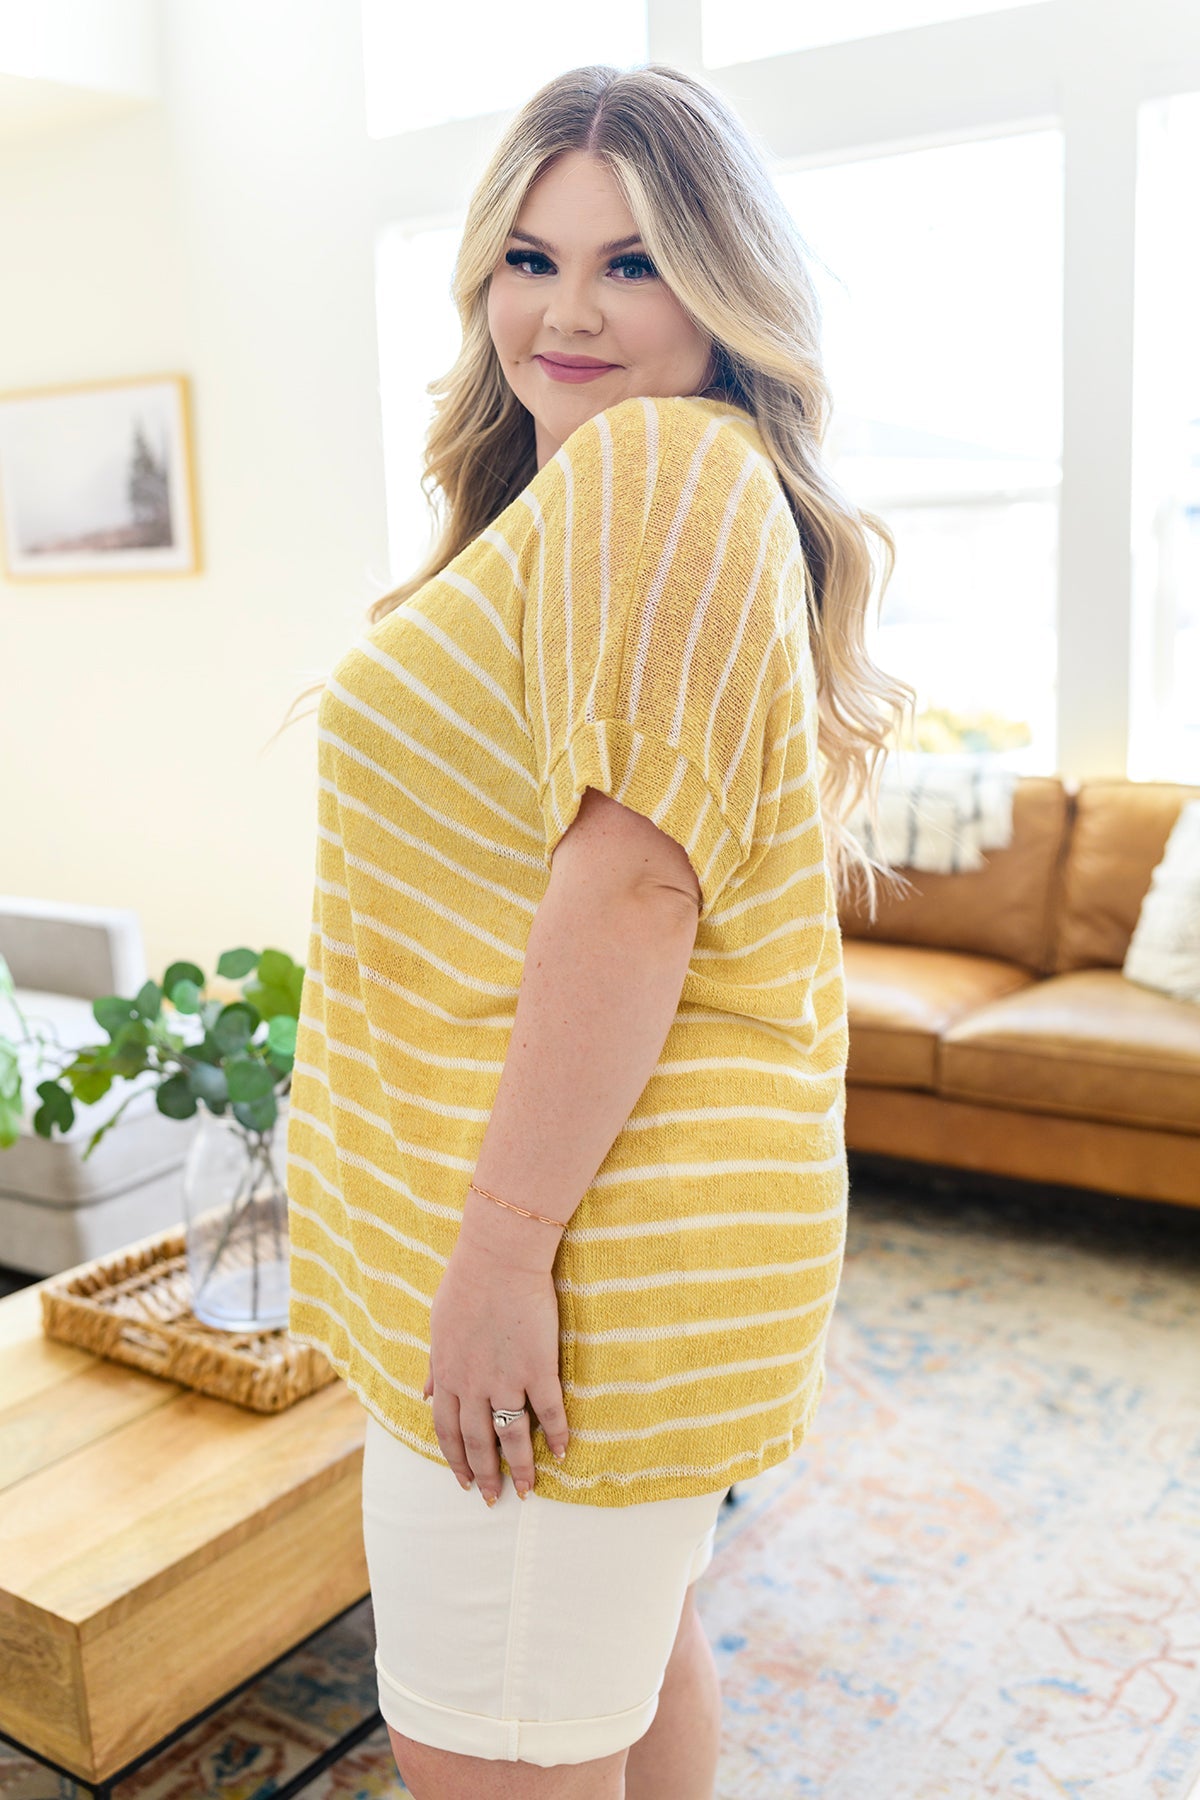 Simply Sweet Striped Top - WEBSITE EXCLUSIVE